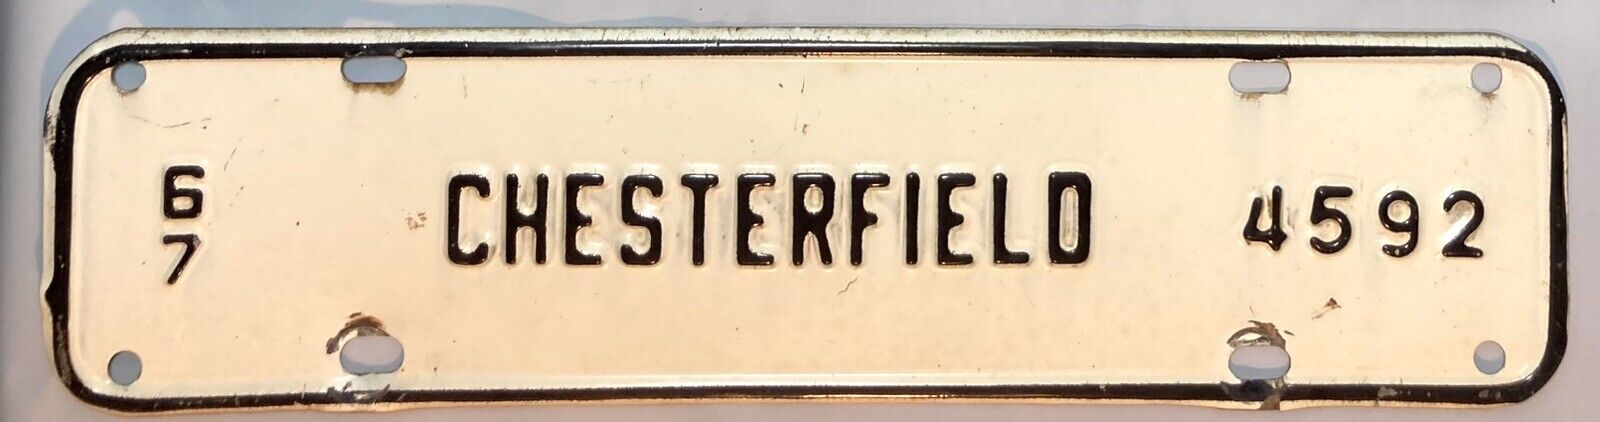 1967 Chesterfield County Virginia License Plate Town Tax Tag City 4592